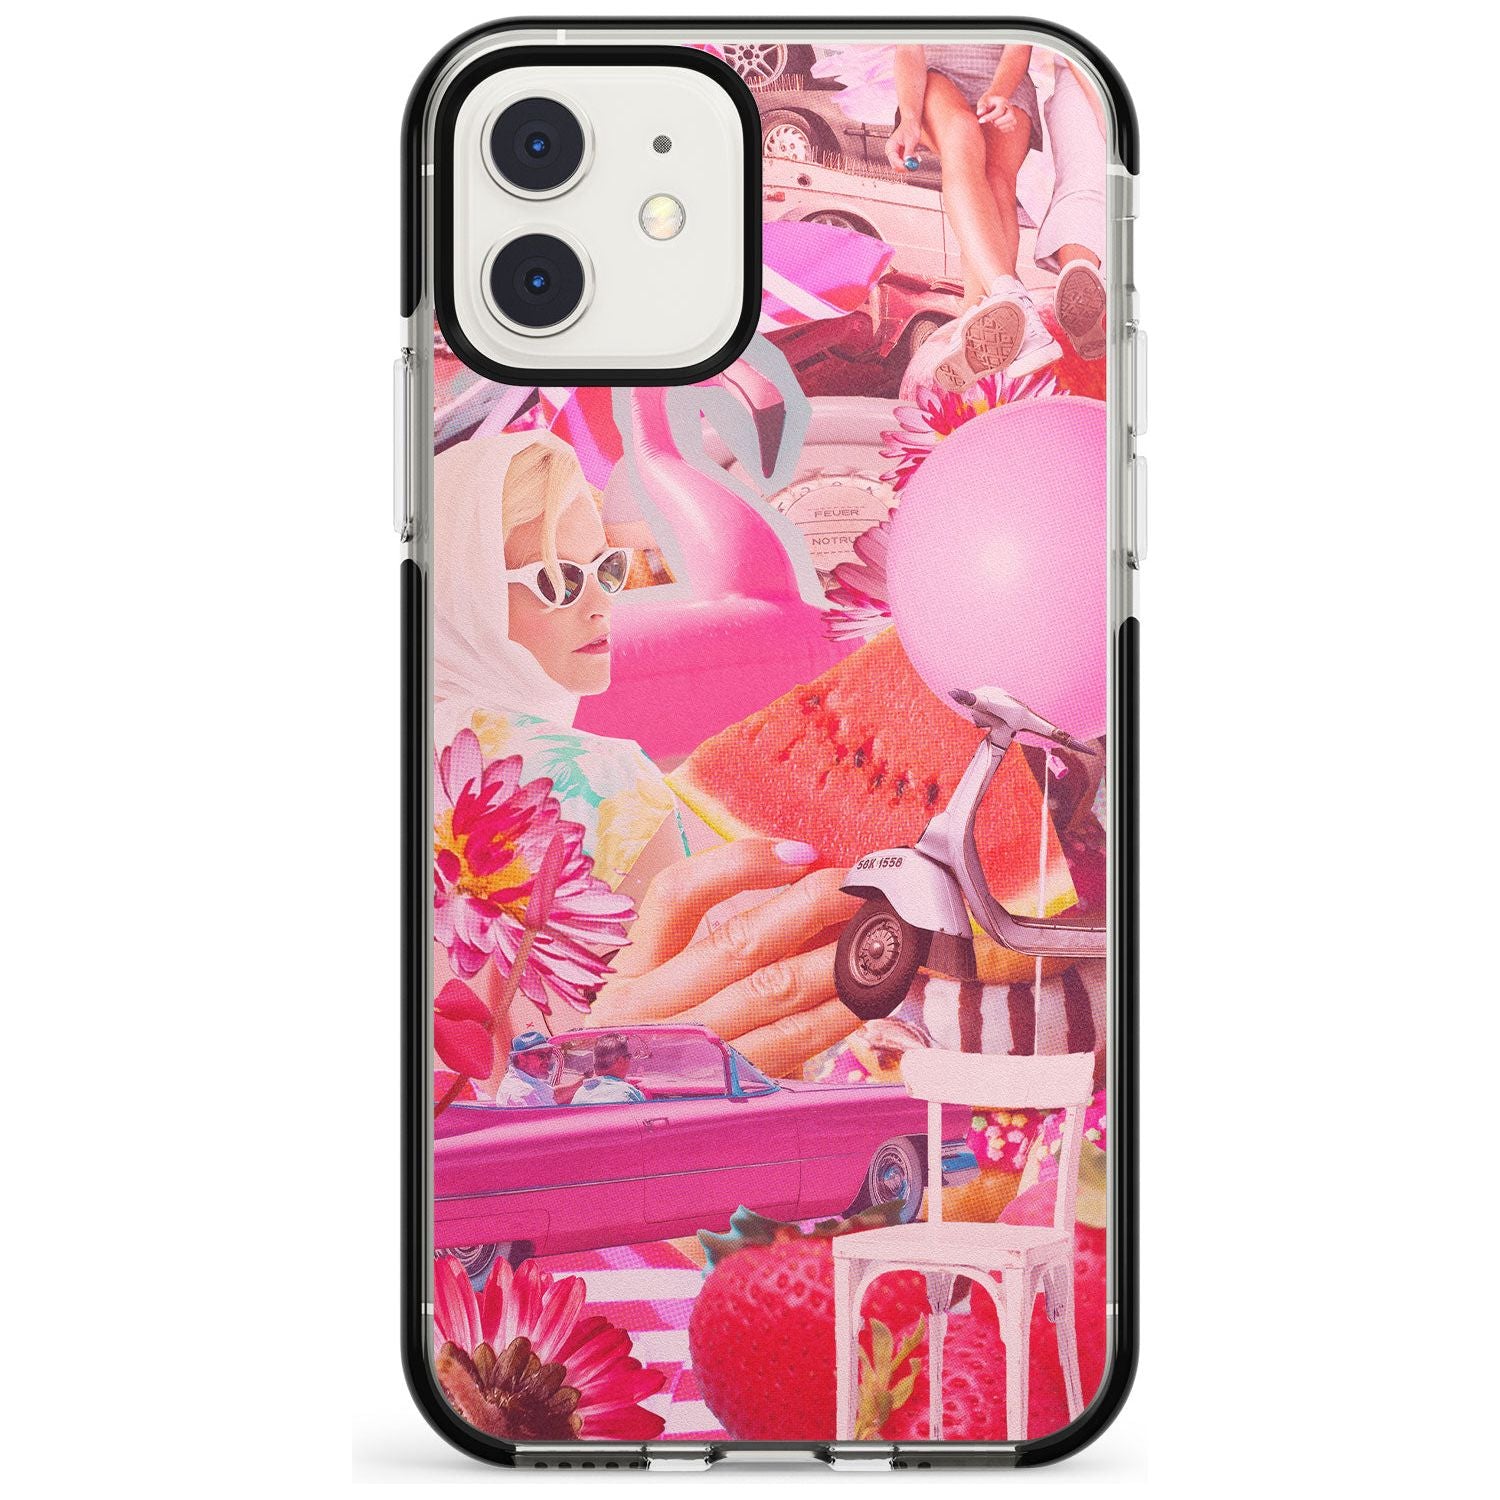 Vintage Collage: Pink Glamour Black Impact Phone Case for iPhone 11